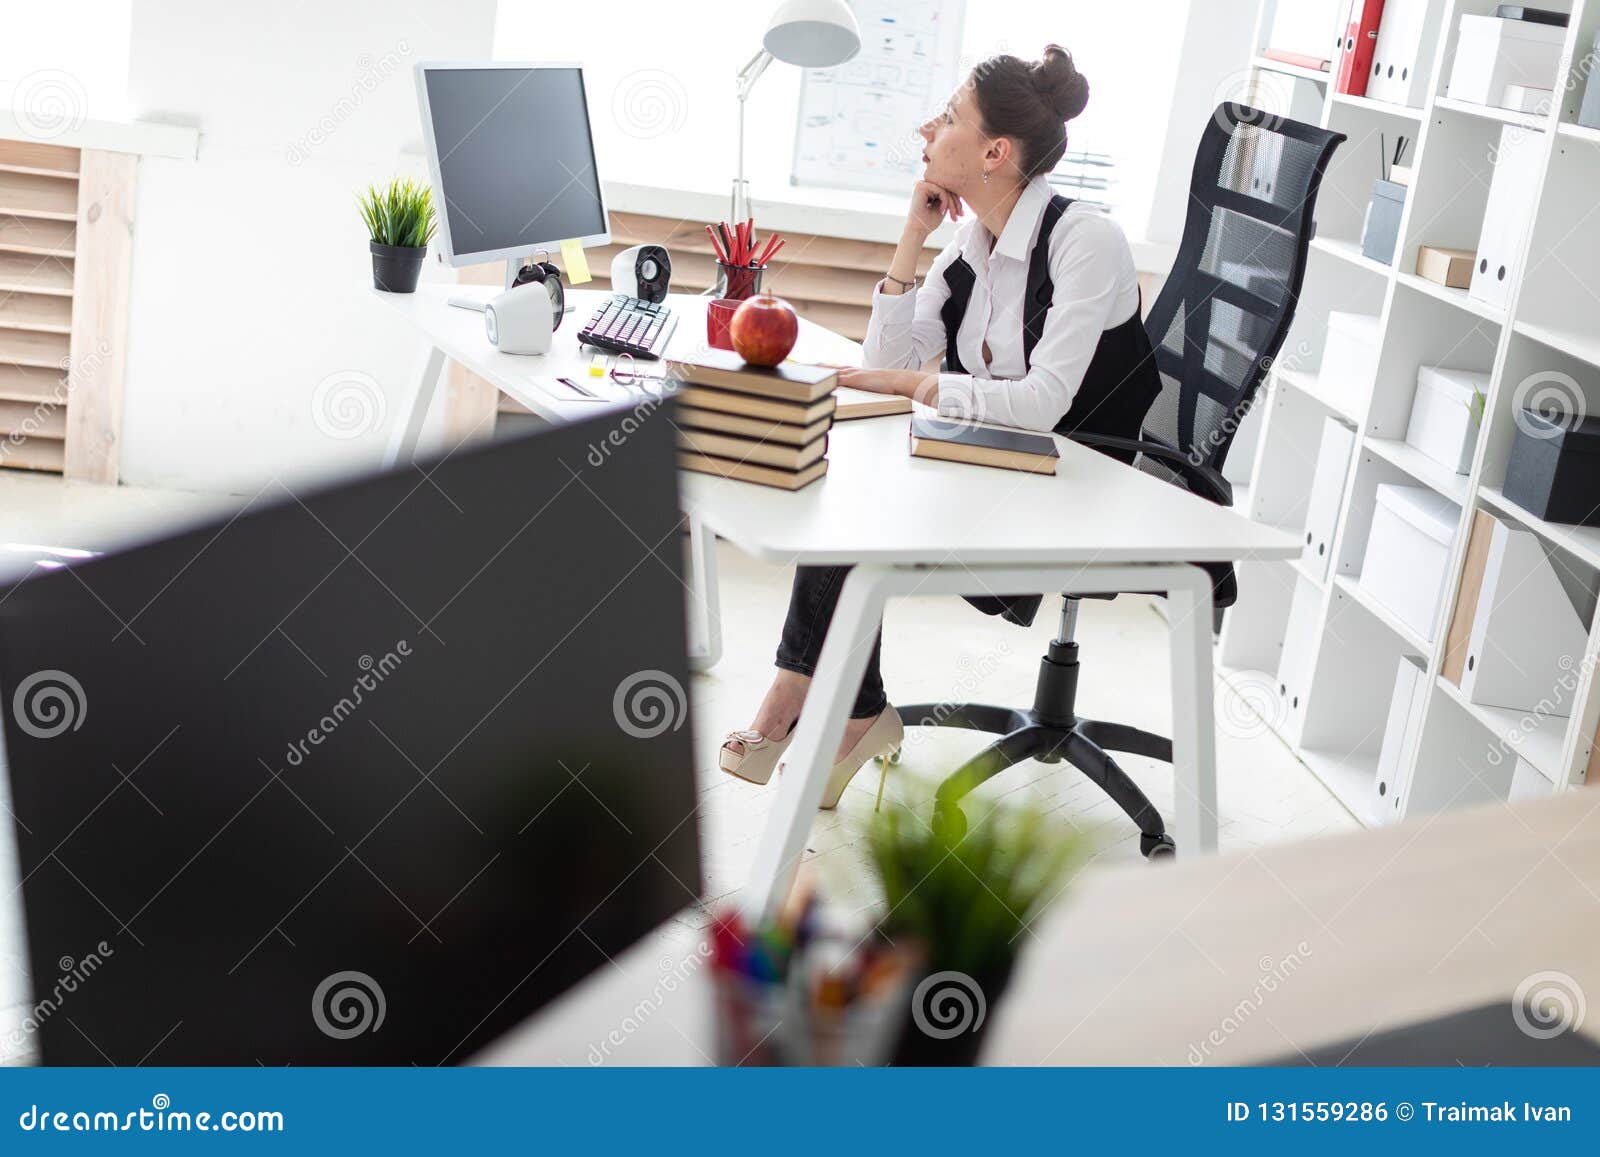 A Young Girl Is Sitting At The Computer Desk In The Office Stock